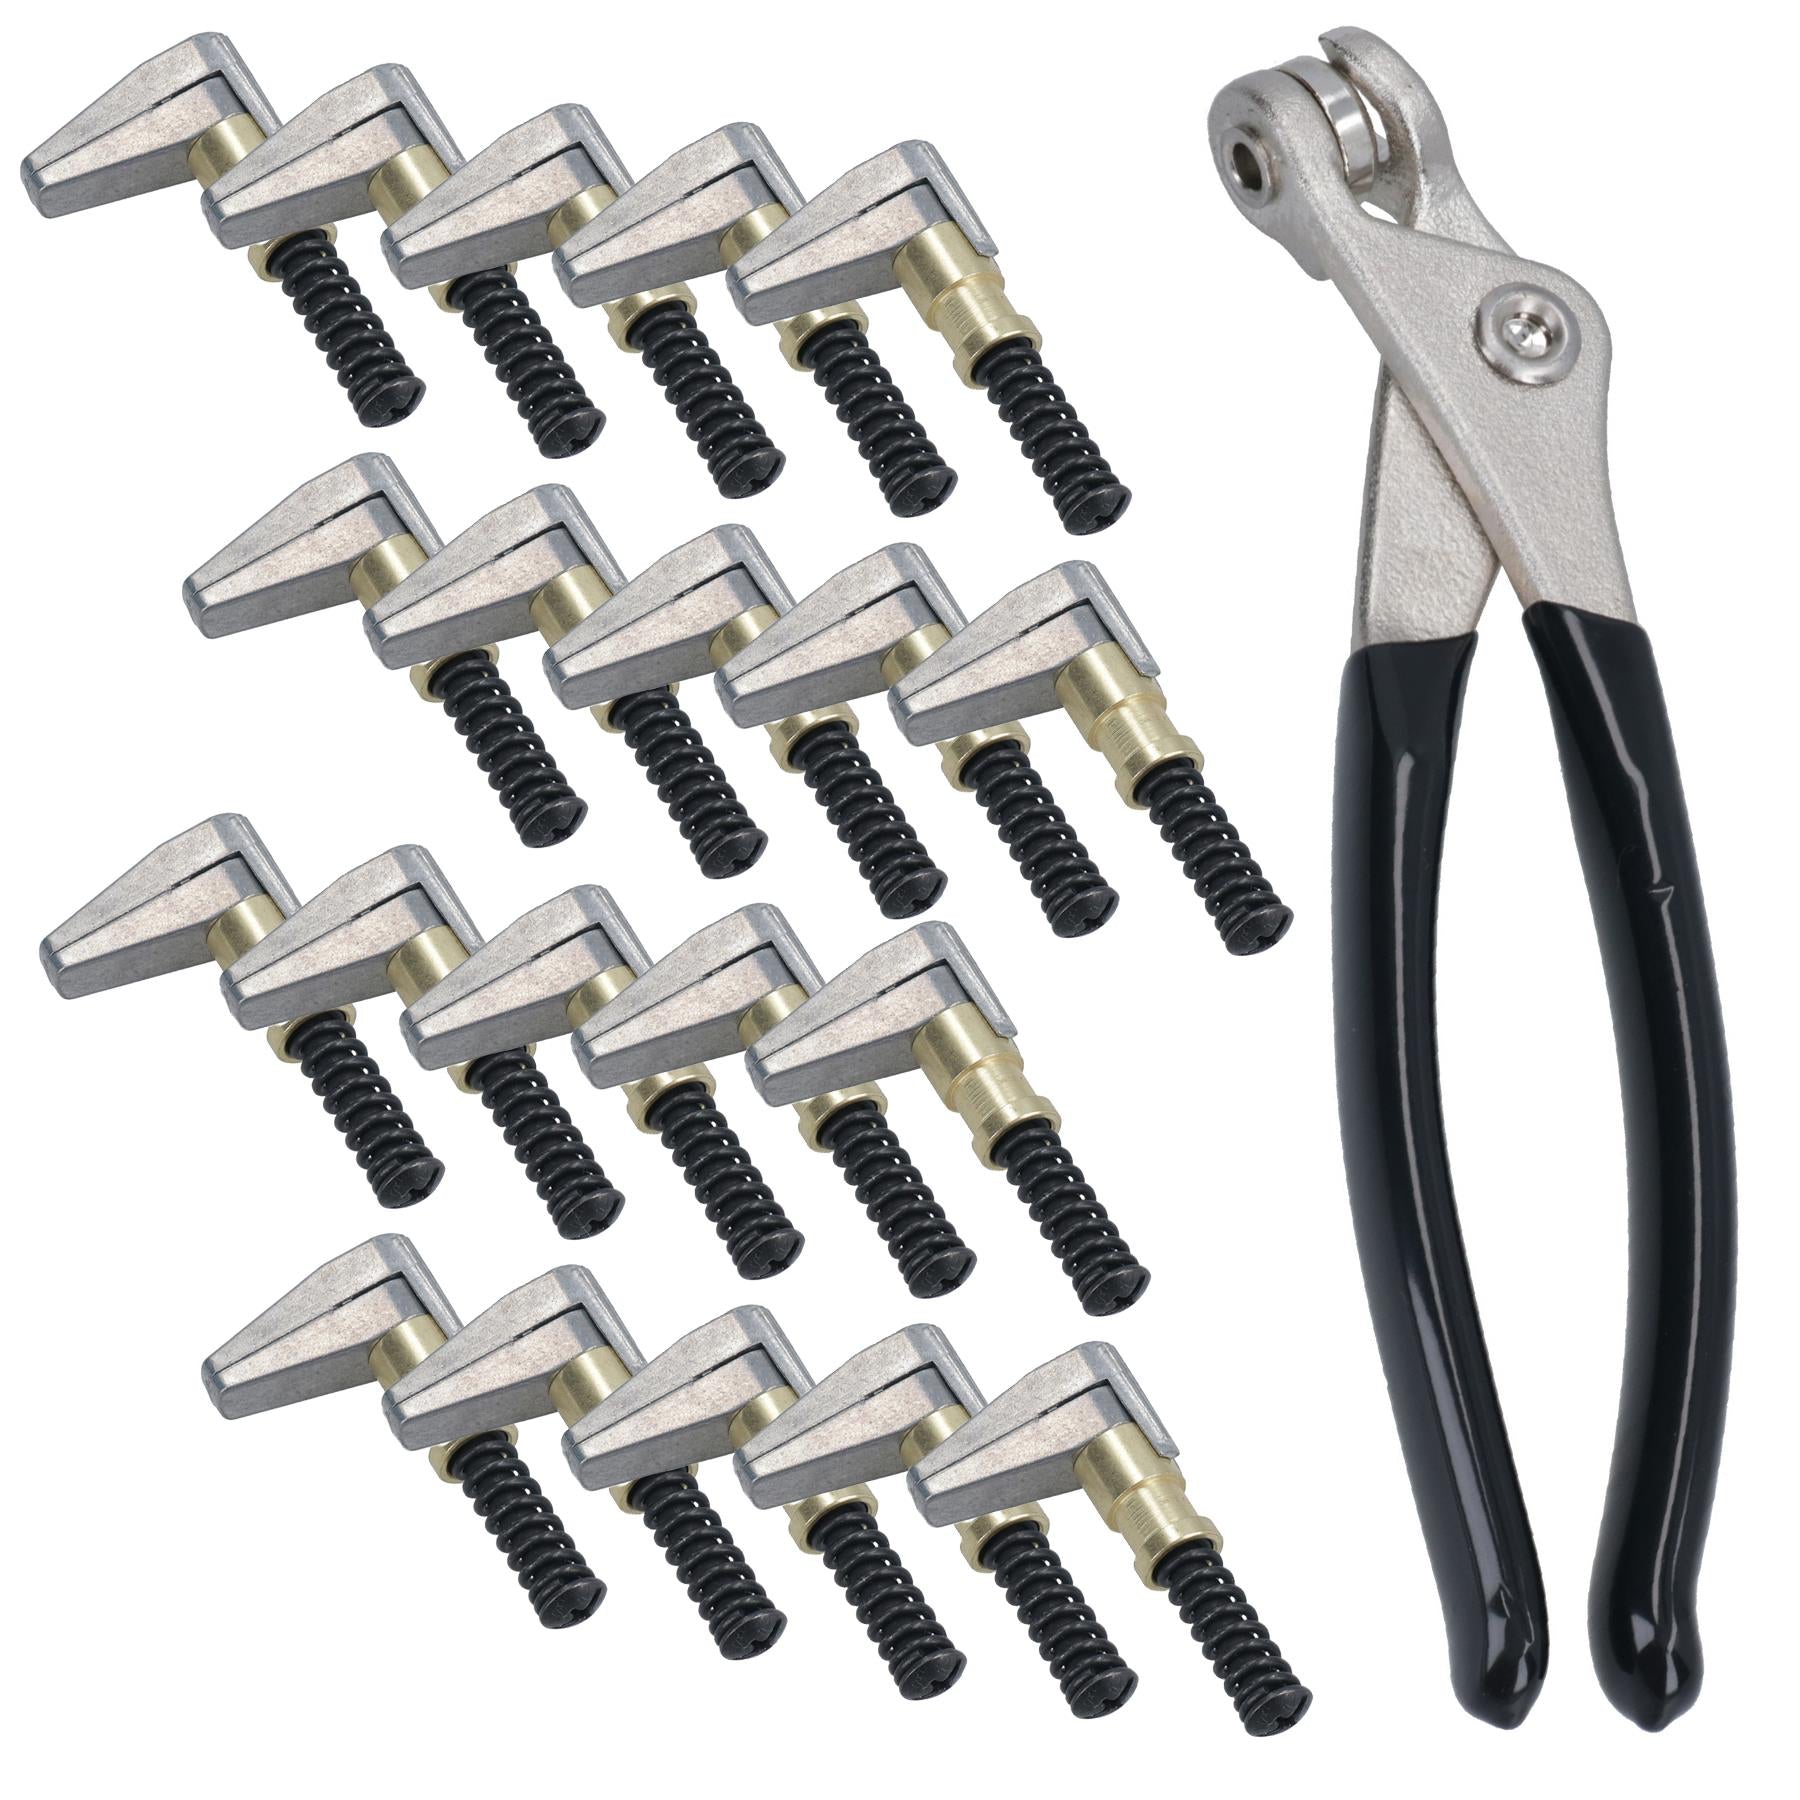 Cleco Side Edge End Clamps Fasteners Grips 19mm Open 25mm Depth + Pliers